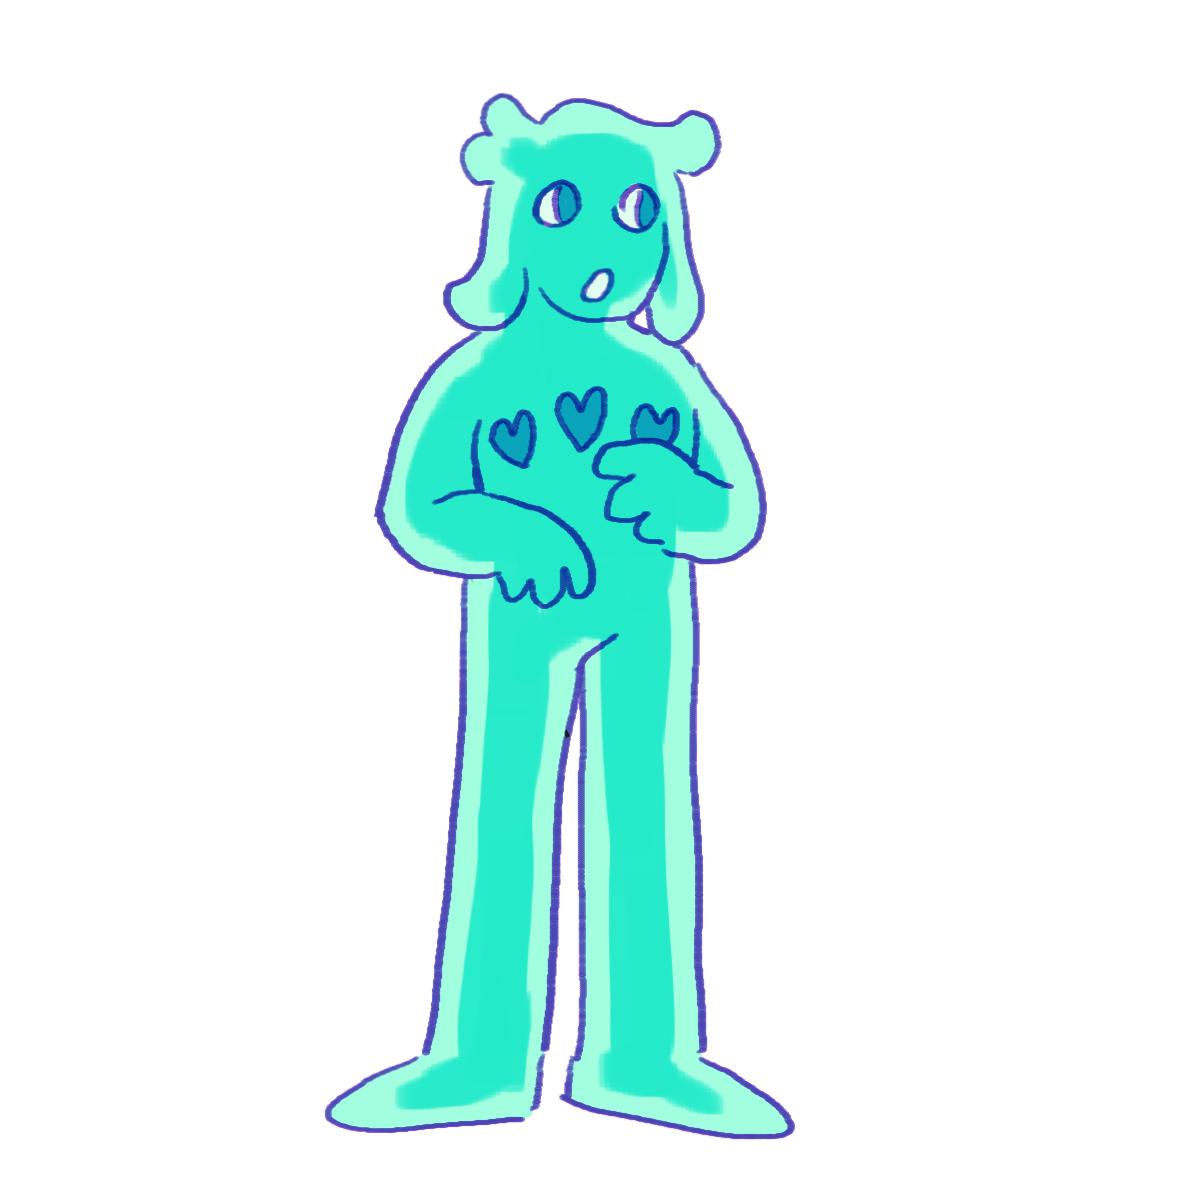 a picture of a turquoise slime person. they have three hearts floating inside their chest, showing that they are at full health.